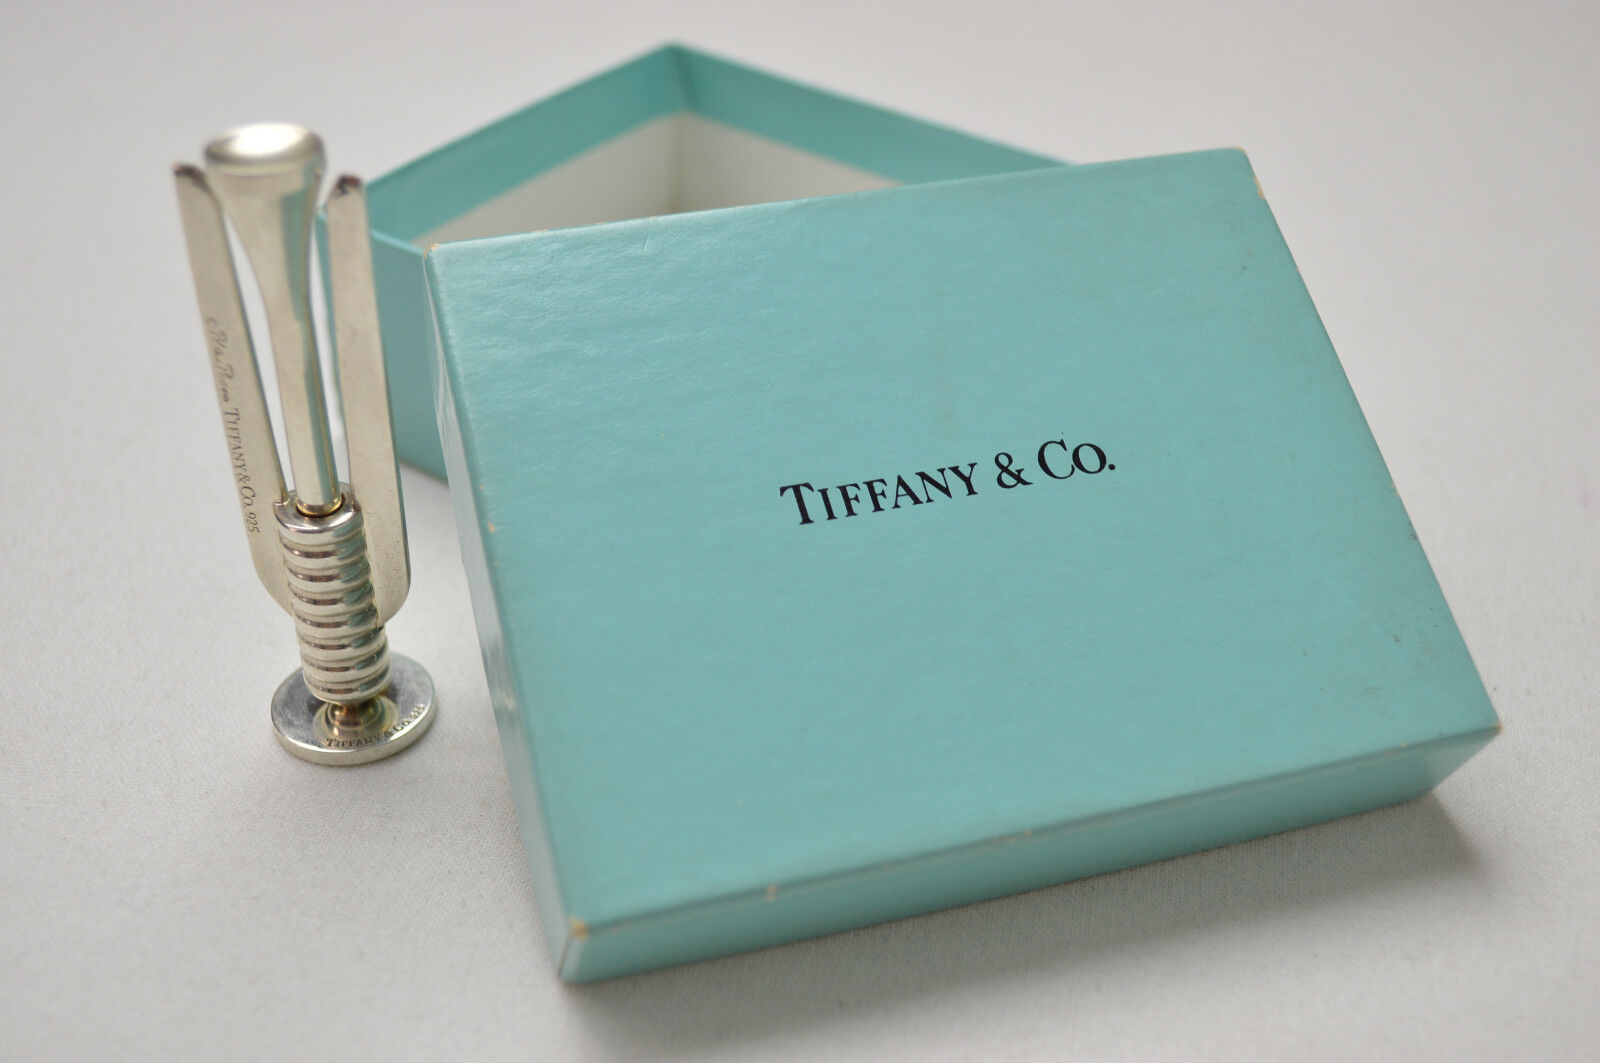 PRE OWNED TIFFANY & CO. 925 STERLING SILVER GOLF TEE AND DIVOT TOOL